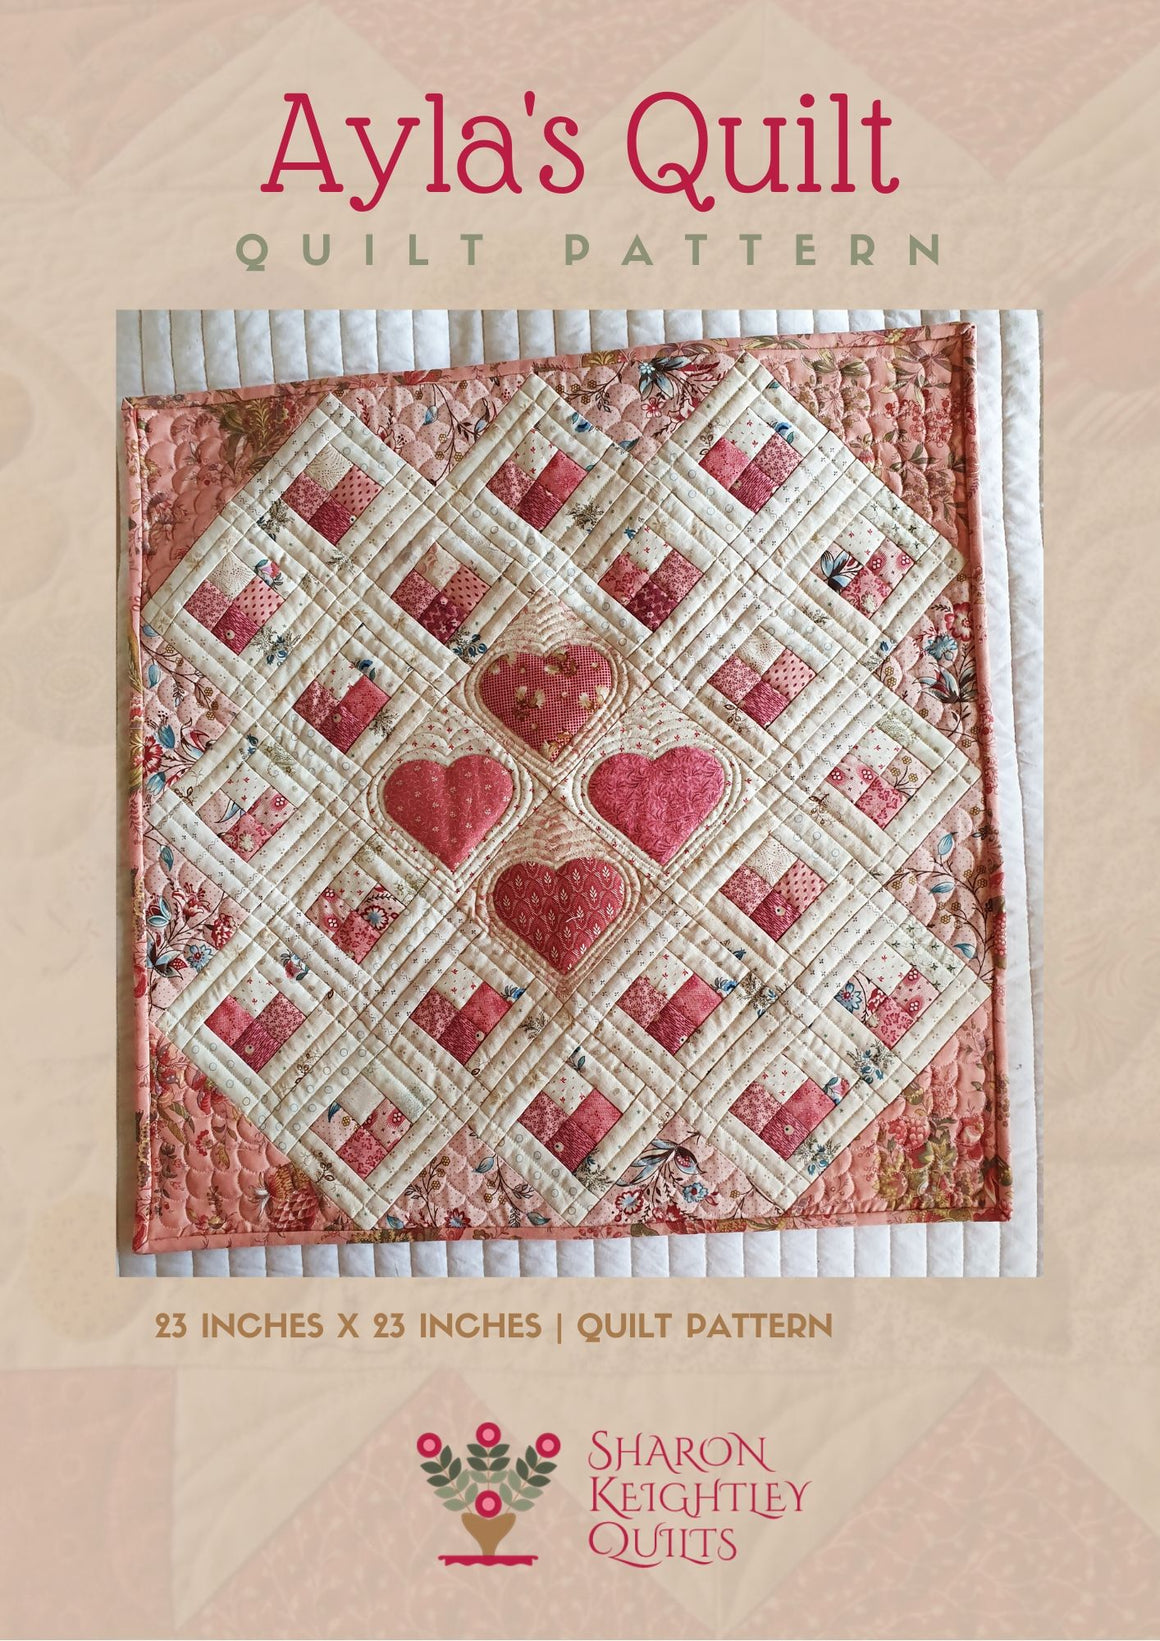 Ayla's Quilt - Pine Valley Quilts